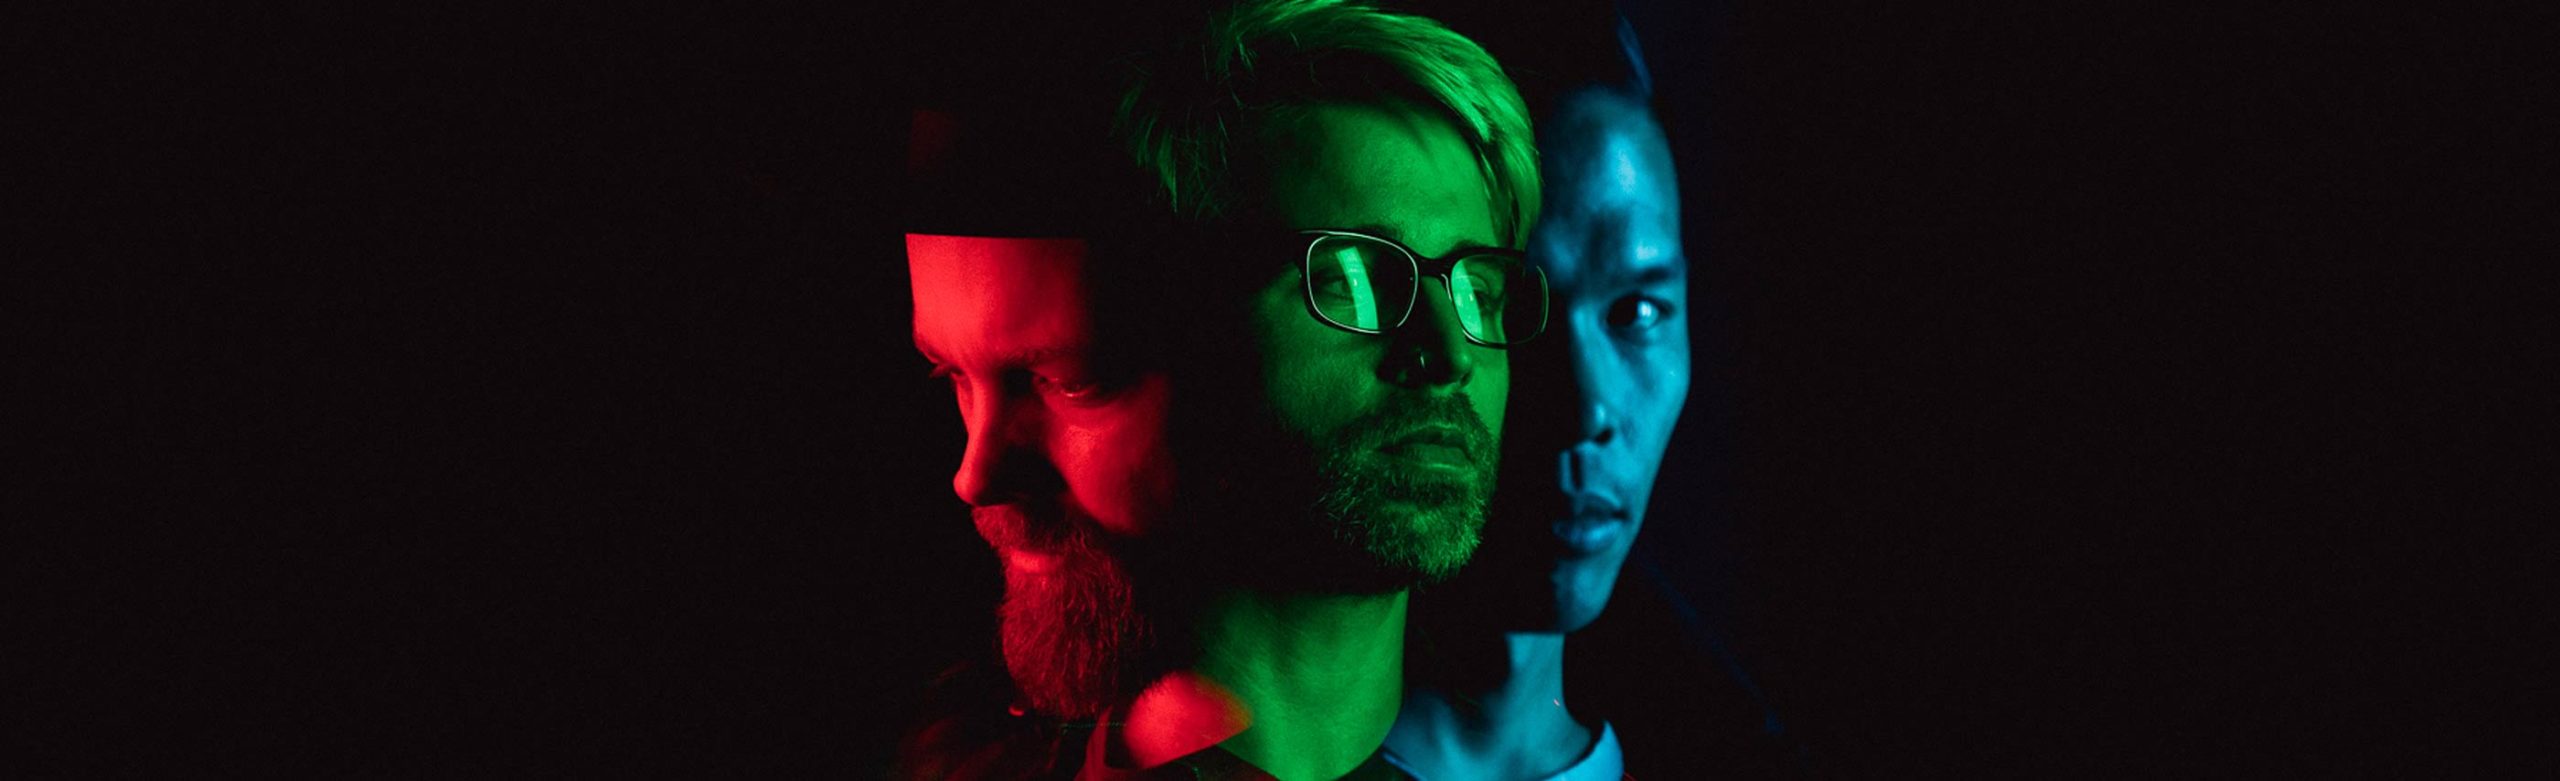 GIVEAWAY: The Glitch Mob Tickets + Merchandise Image